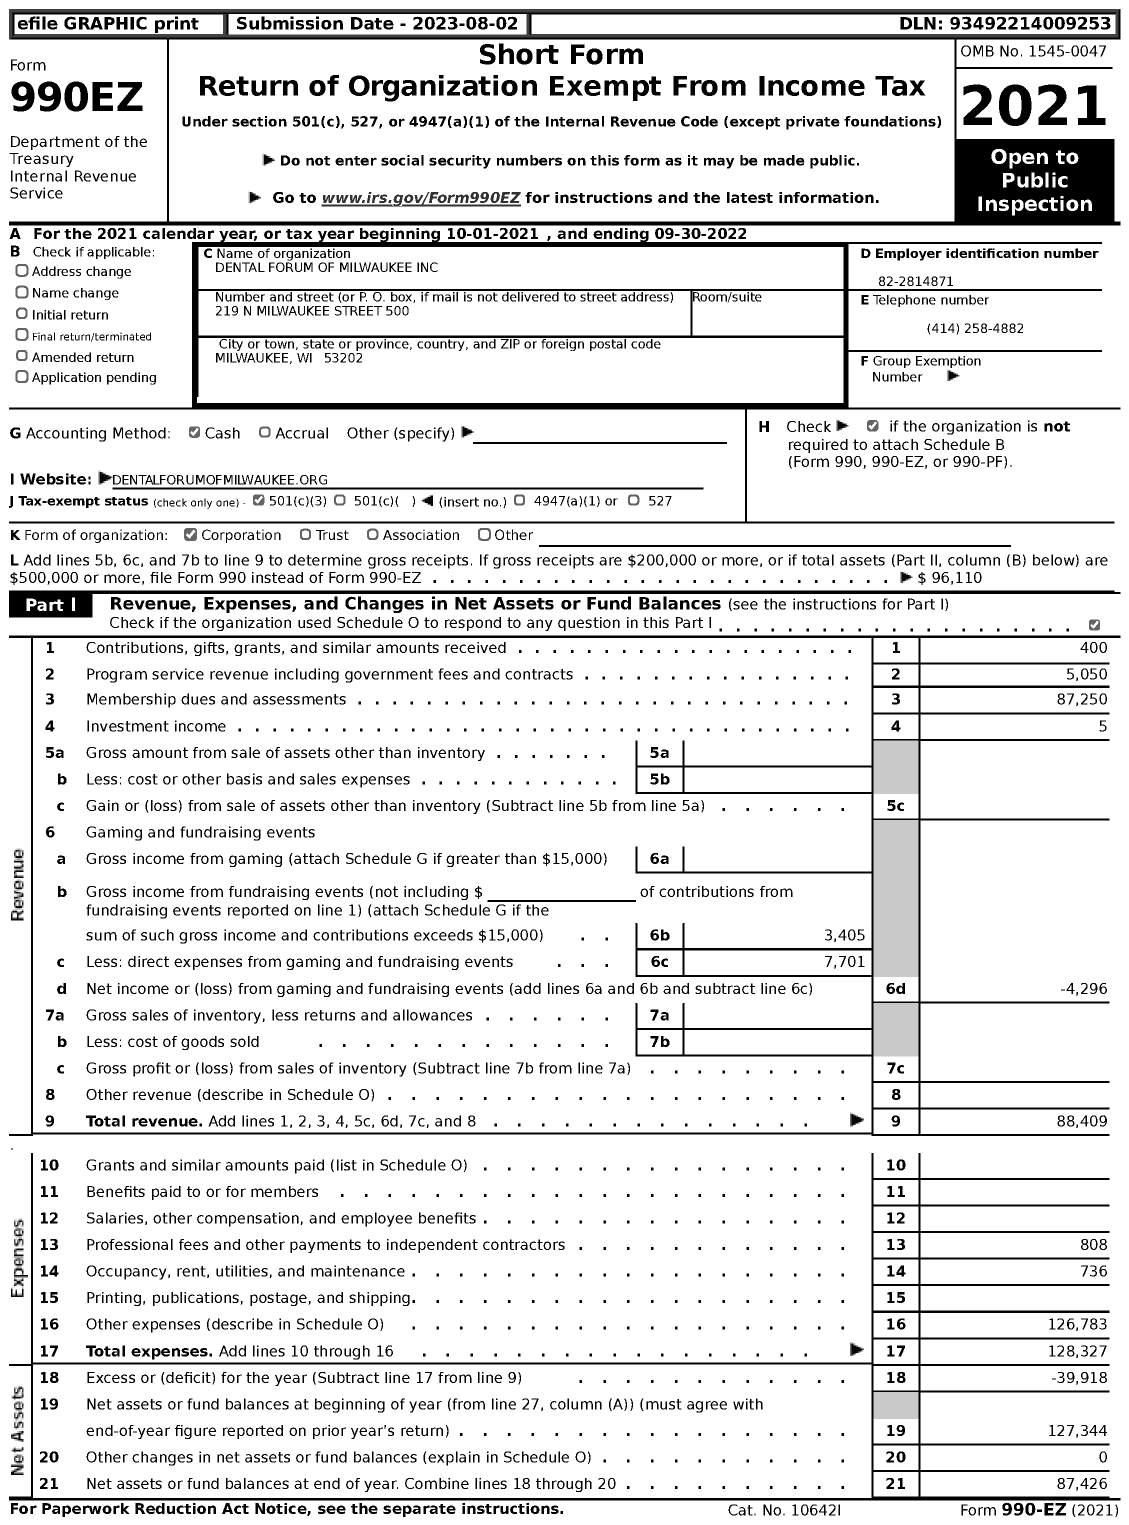 Image of first page of 2021 Form 990EZ for Dental Forum of Milwaukee